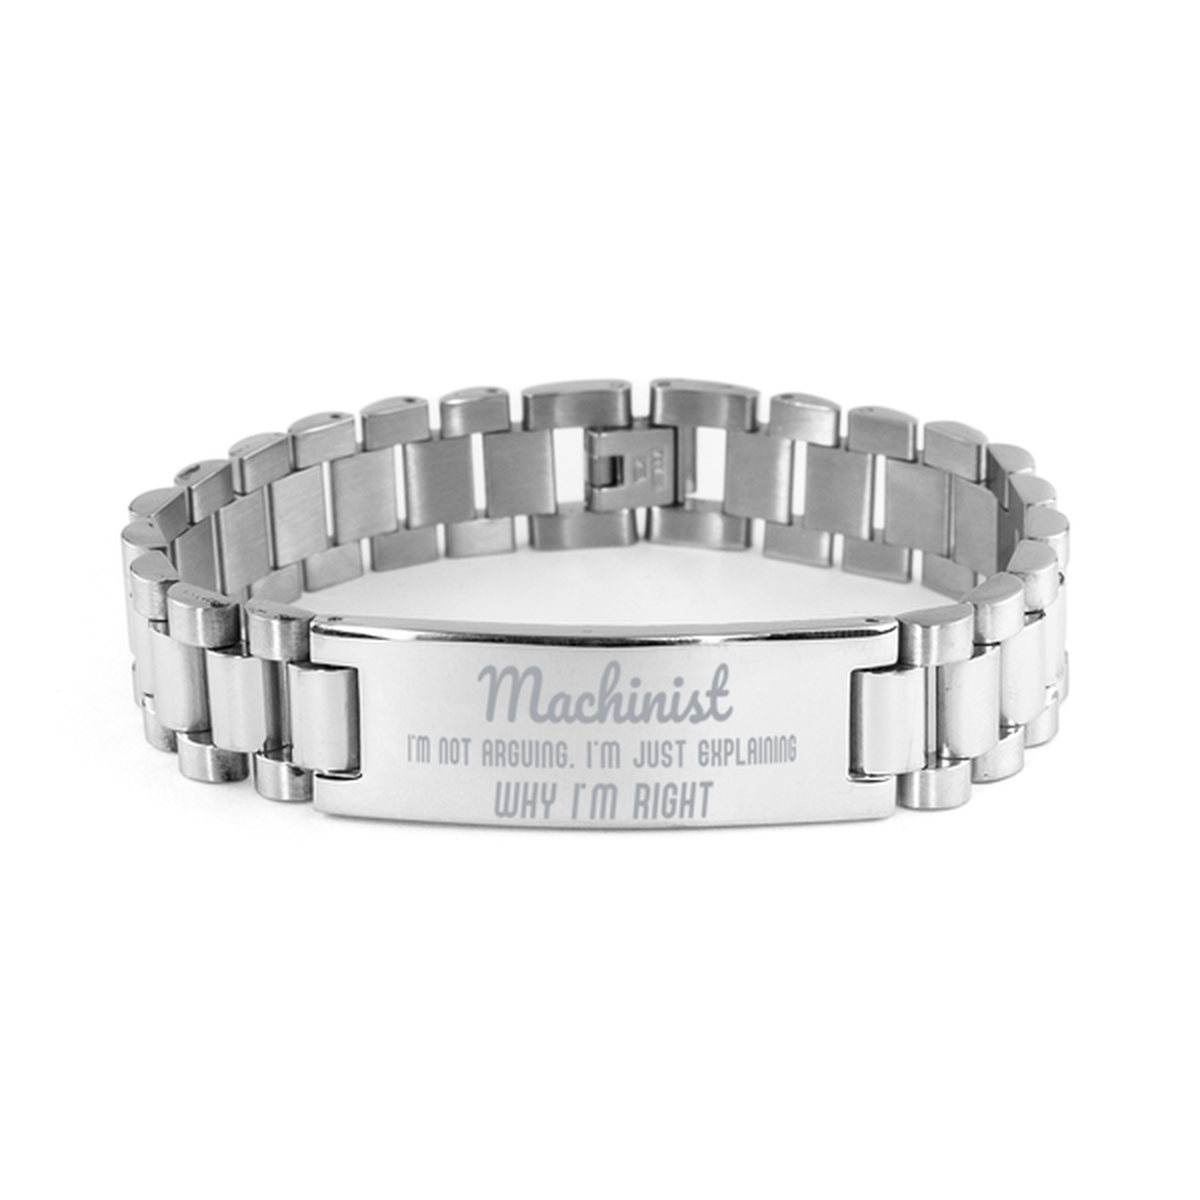 Machinist I'm not Arguing. I'm Just Explaining Why I'm RIGHT Ladder Stainless Steel Bracelet, Graduation Birthday Christmas Machinist Gifts For Machinist Funny Saying Quote Present for Men Women Coworker